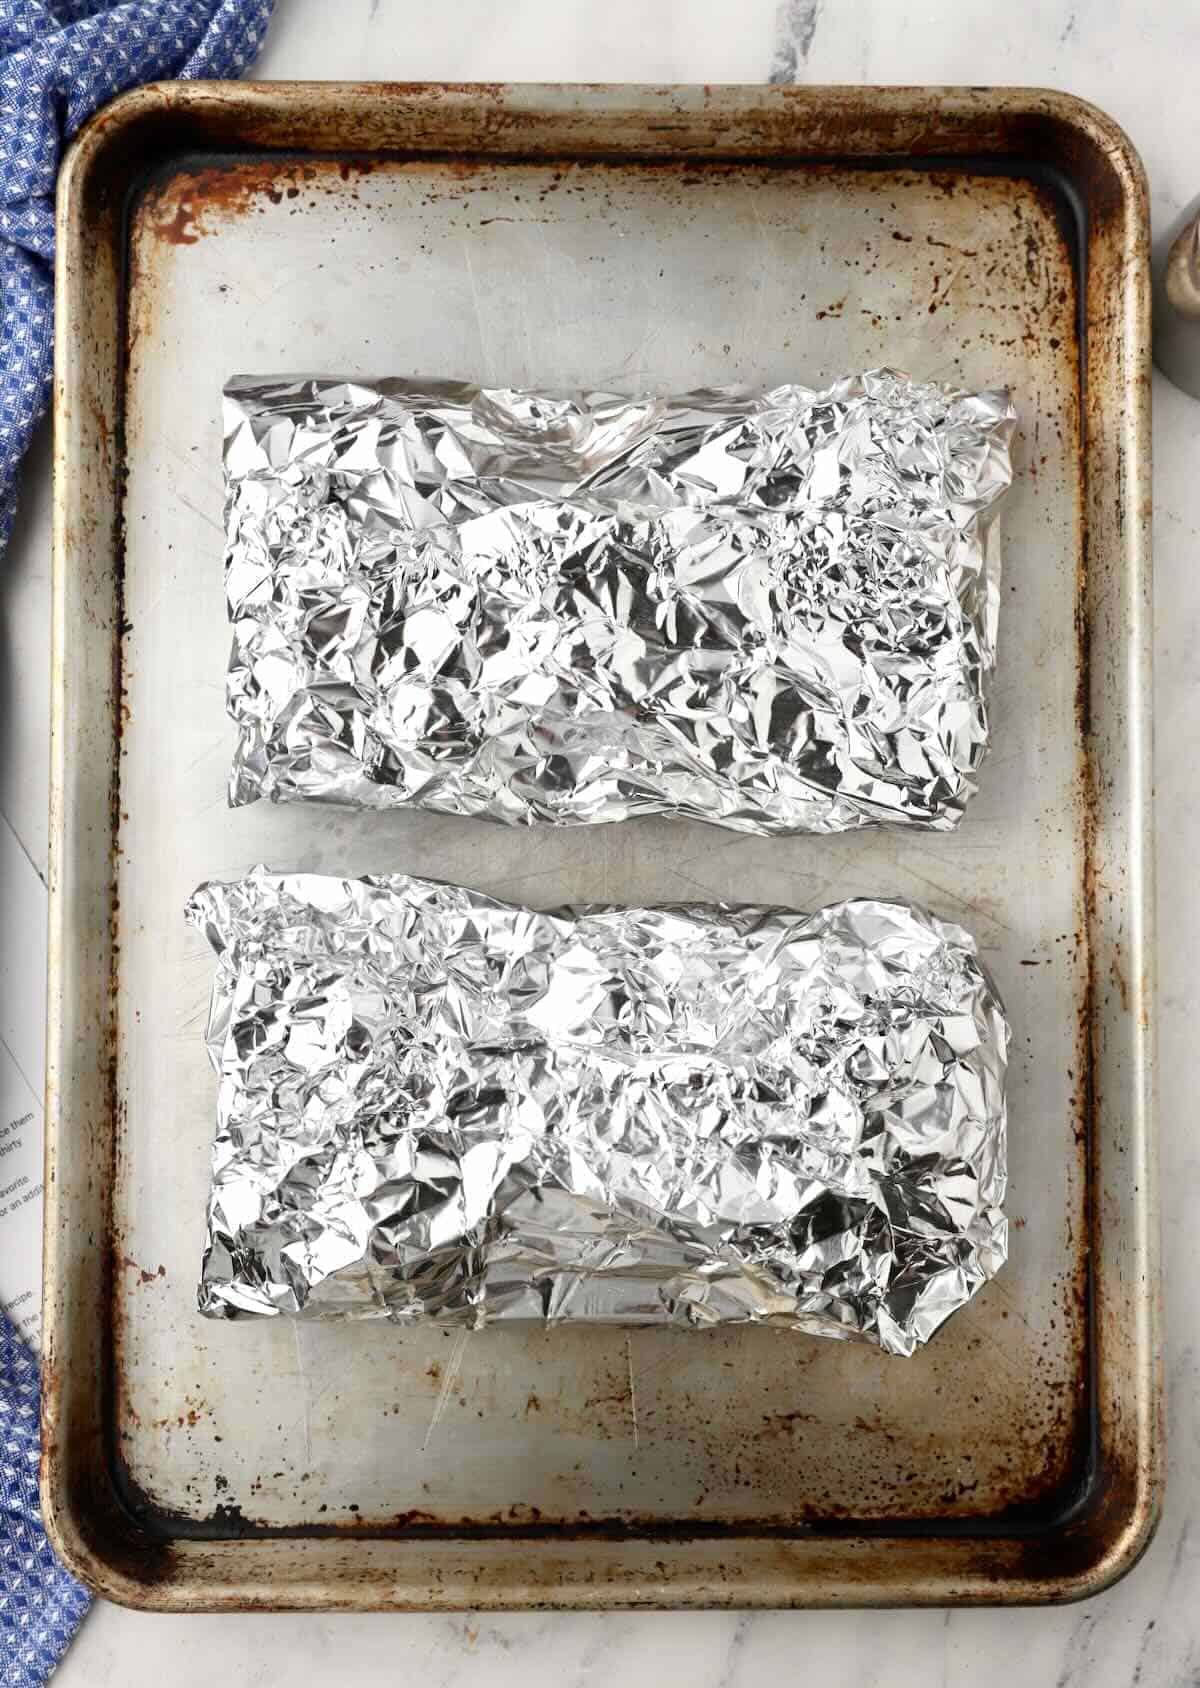 Two racks of ribs wrapped in aluminum foil on a baking sheet.